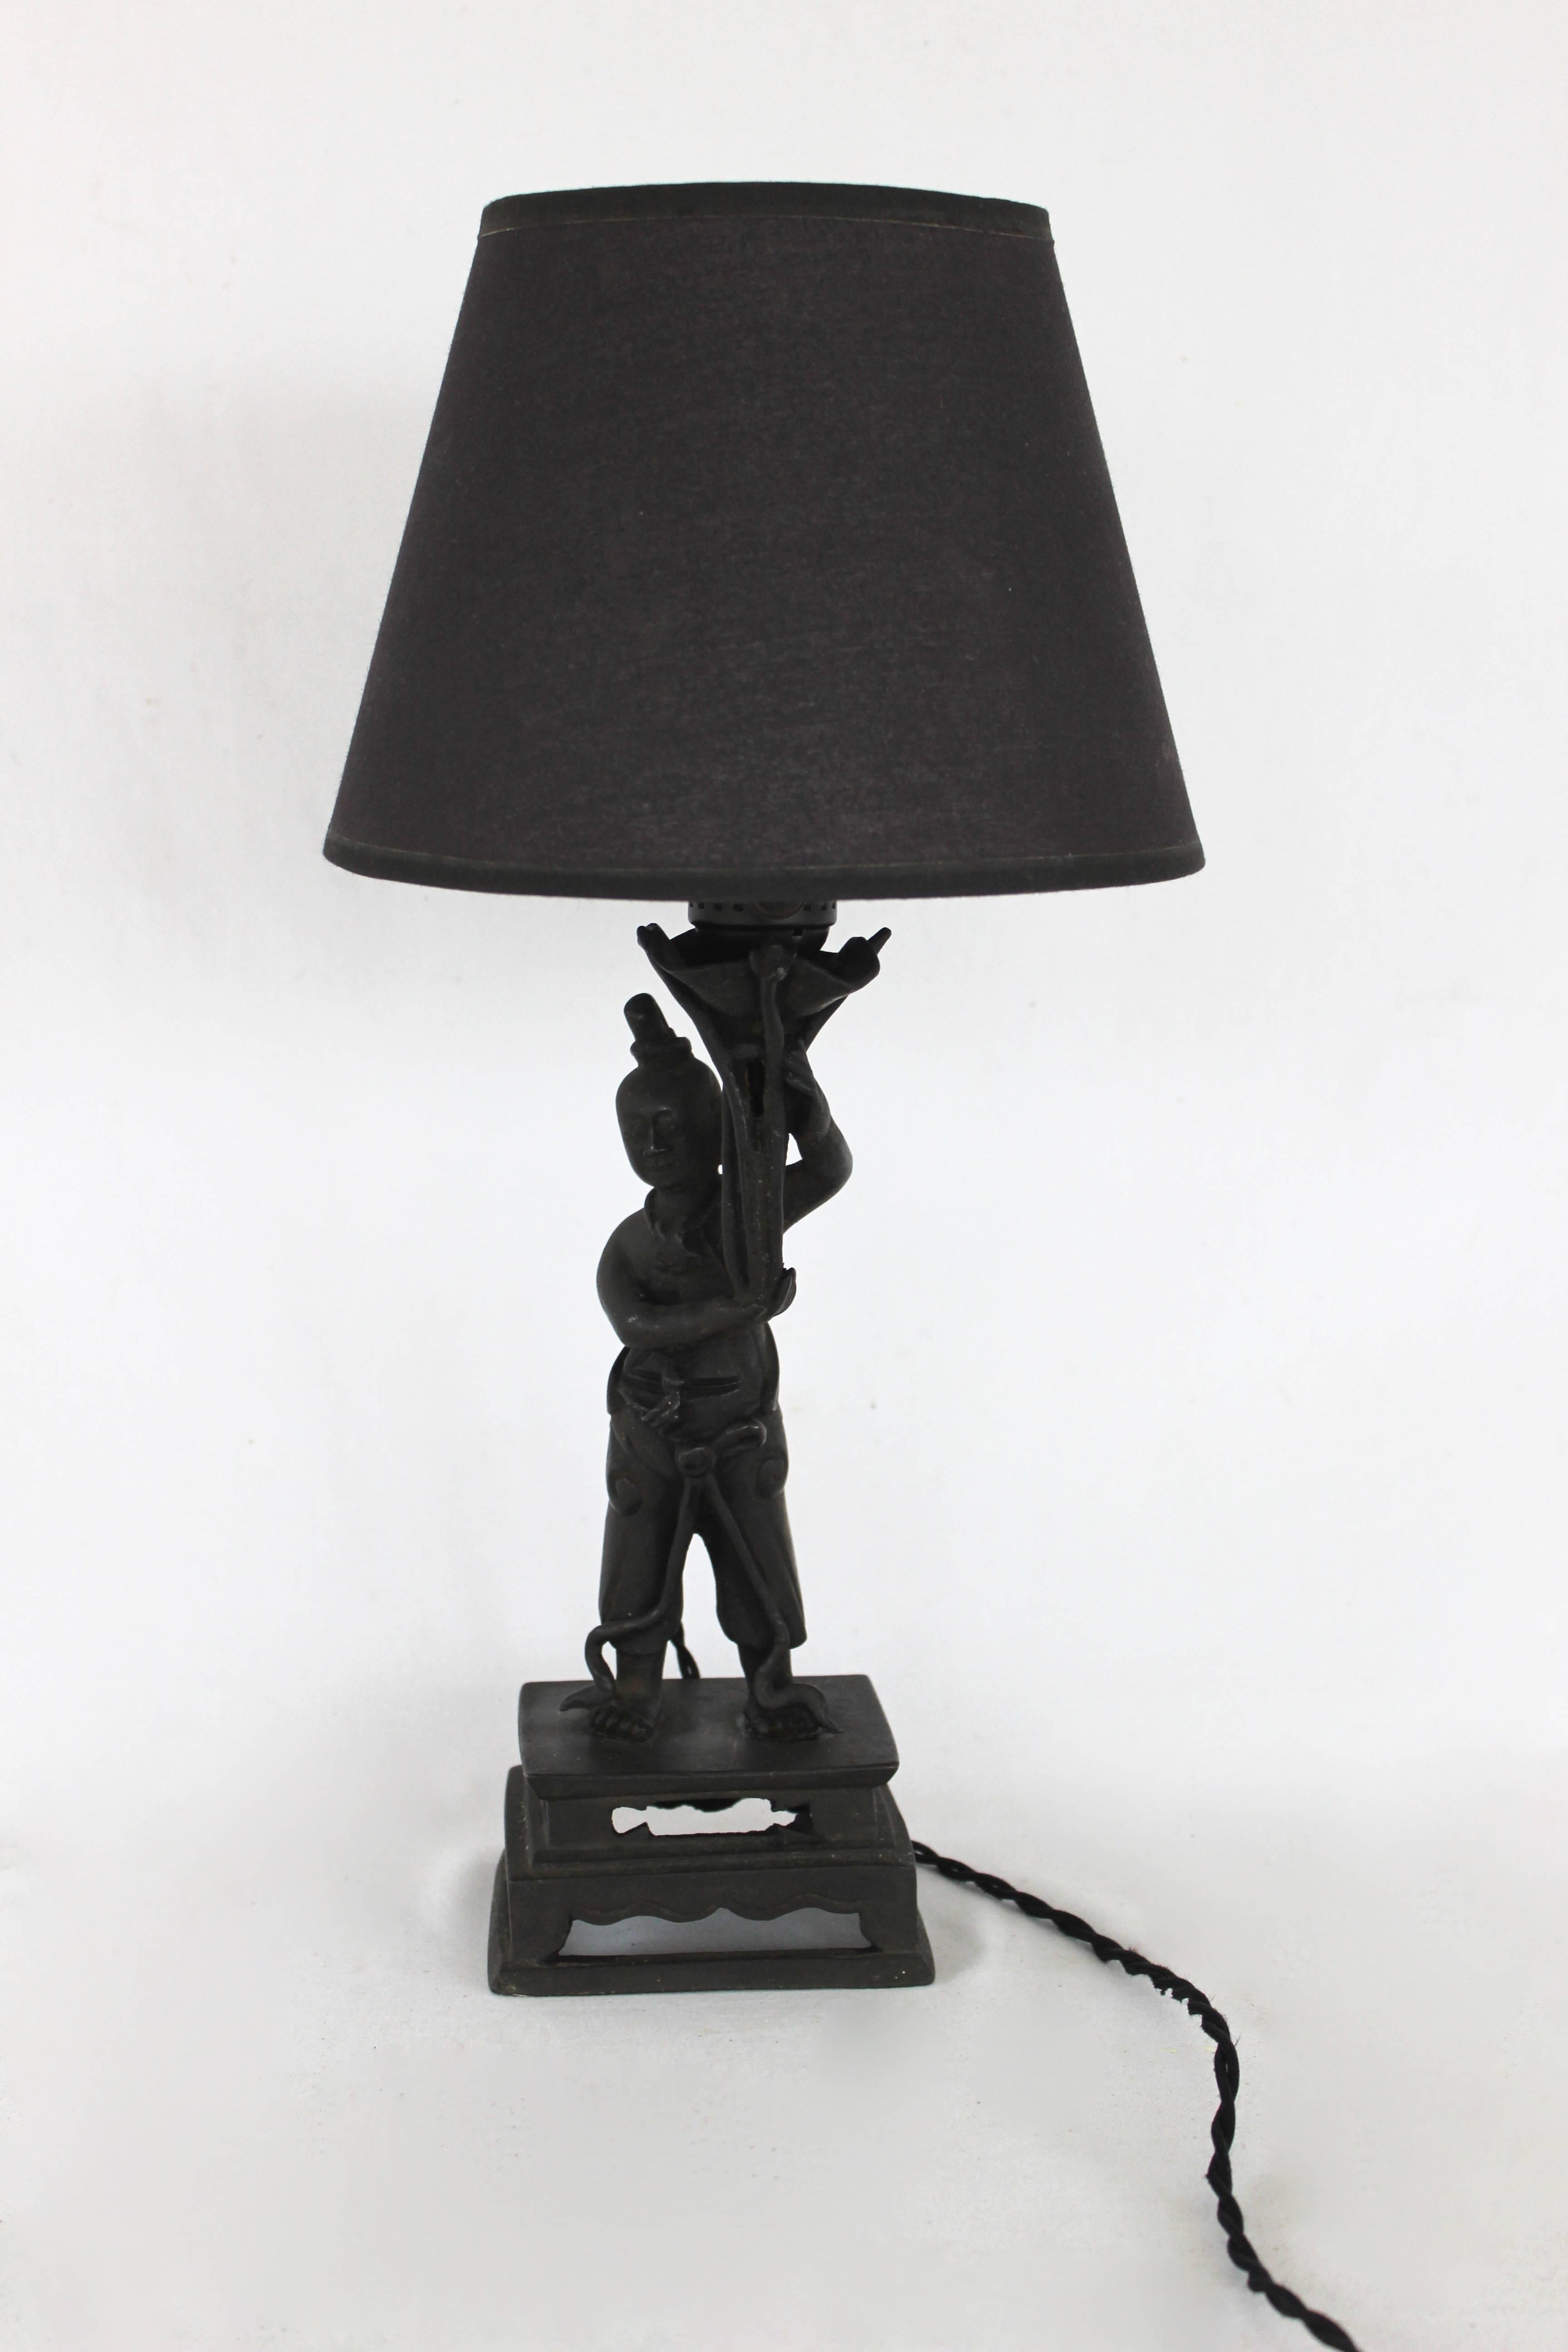 Figural metal table lamp. 

Newly French wired.